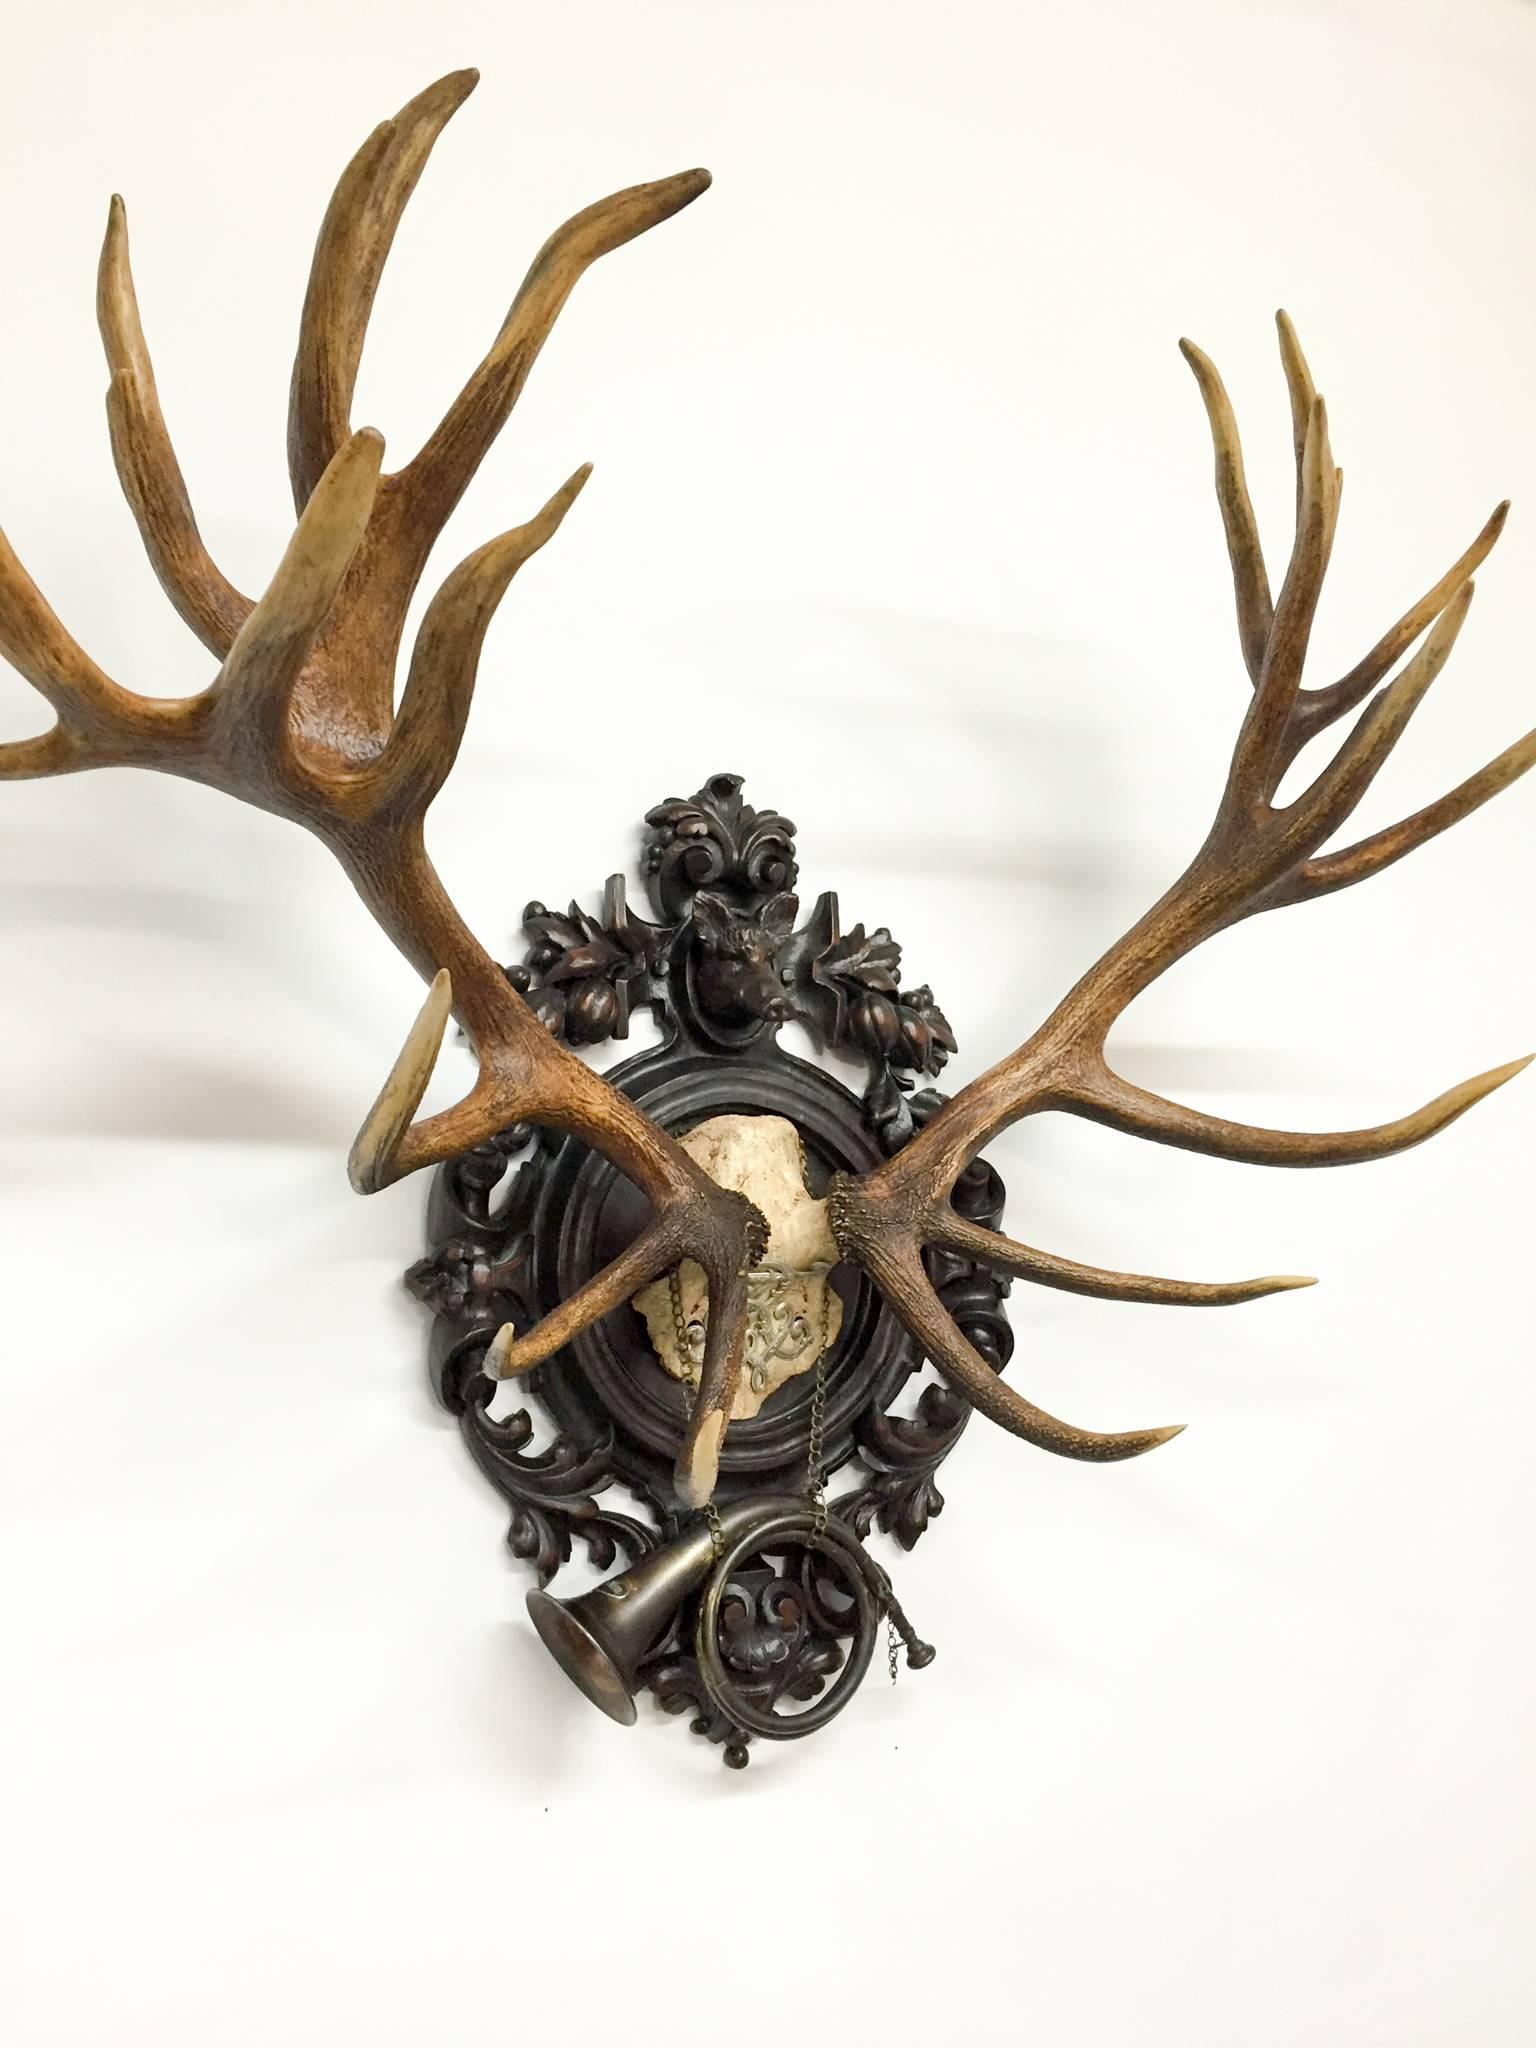 Historic red stag trophy taken during Kaiser Wilhelm II of Germany's Eulenburg hunt of 1892 in Liebenburg, Germany and decorated with an original cypher of Wilhelm Frederick III of Germany (the Kaiser's grandfather). Also included is the original